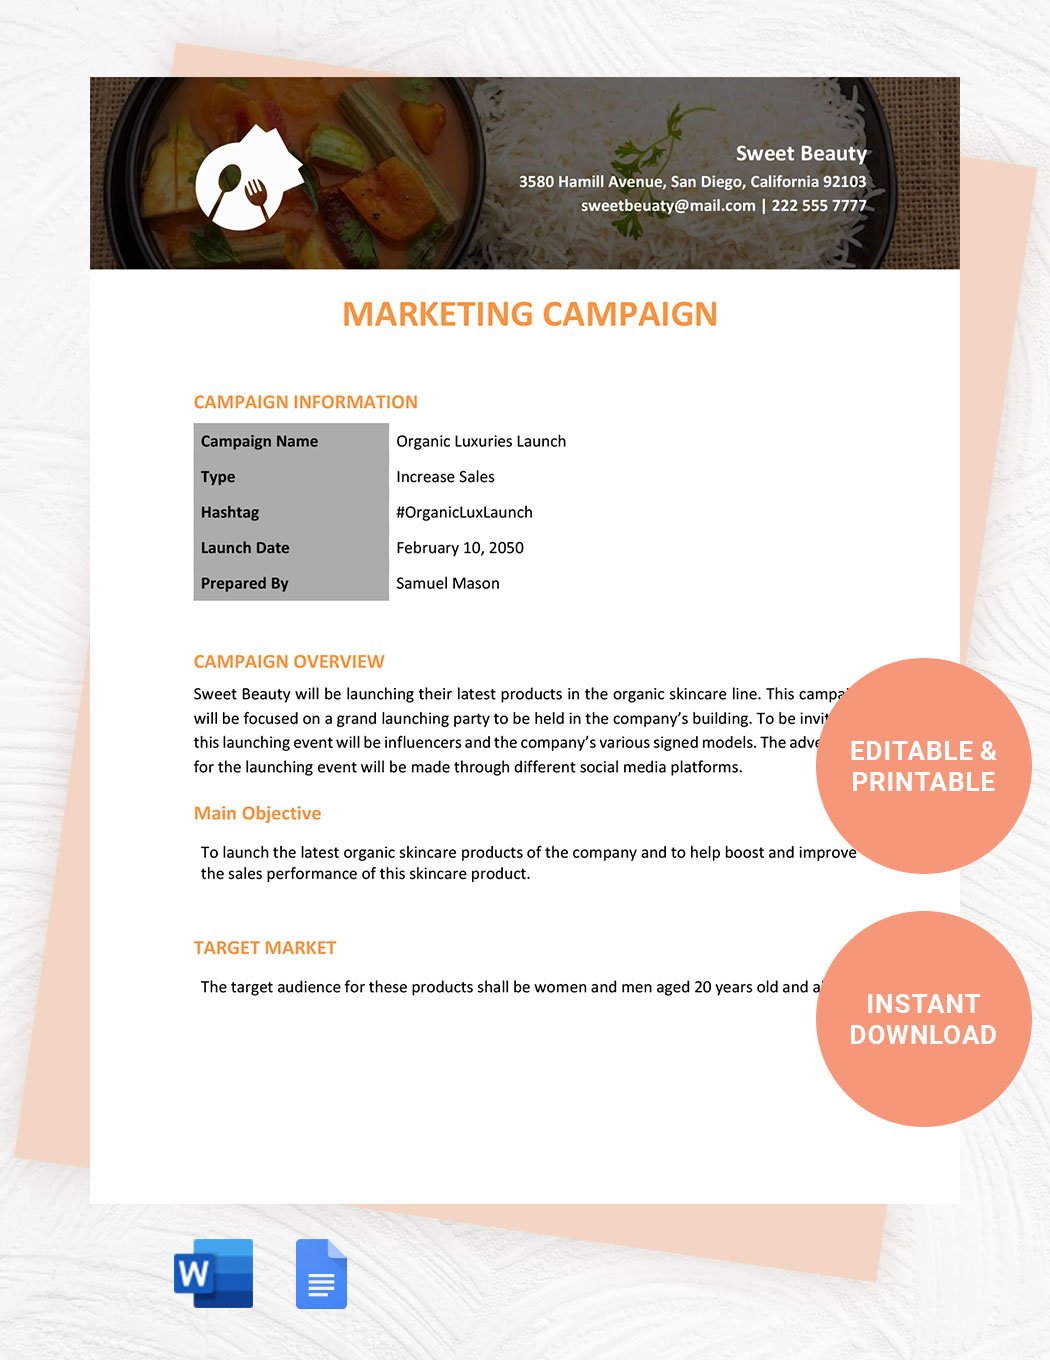 Marketing Campaign Template in Word